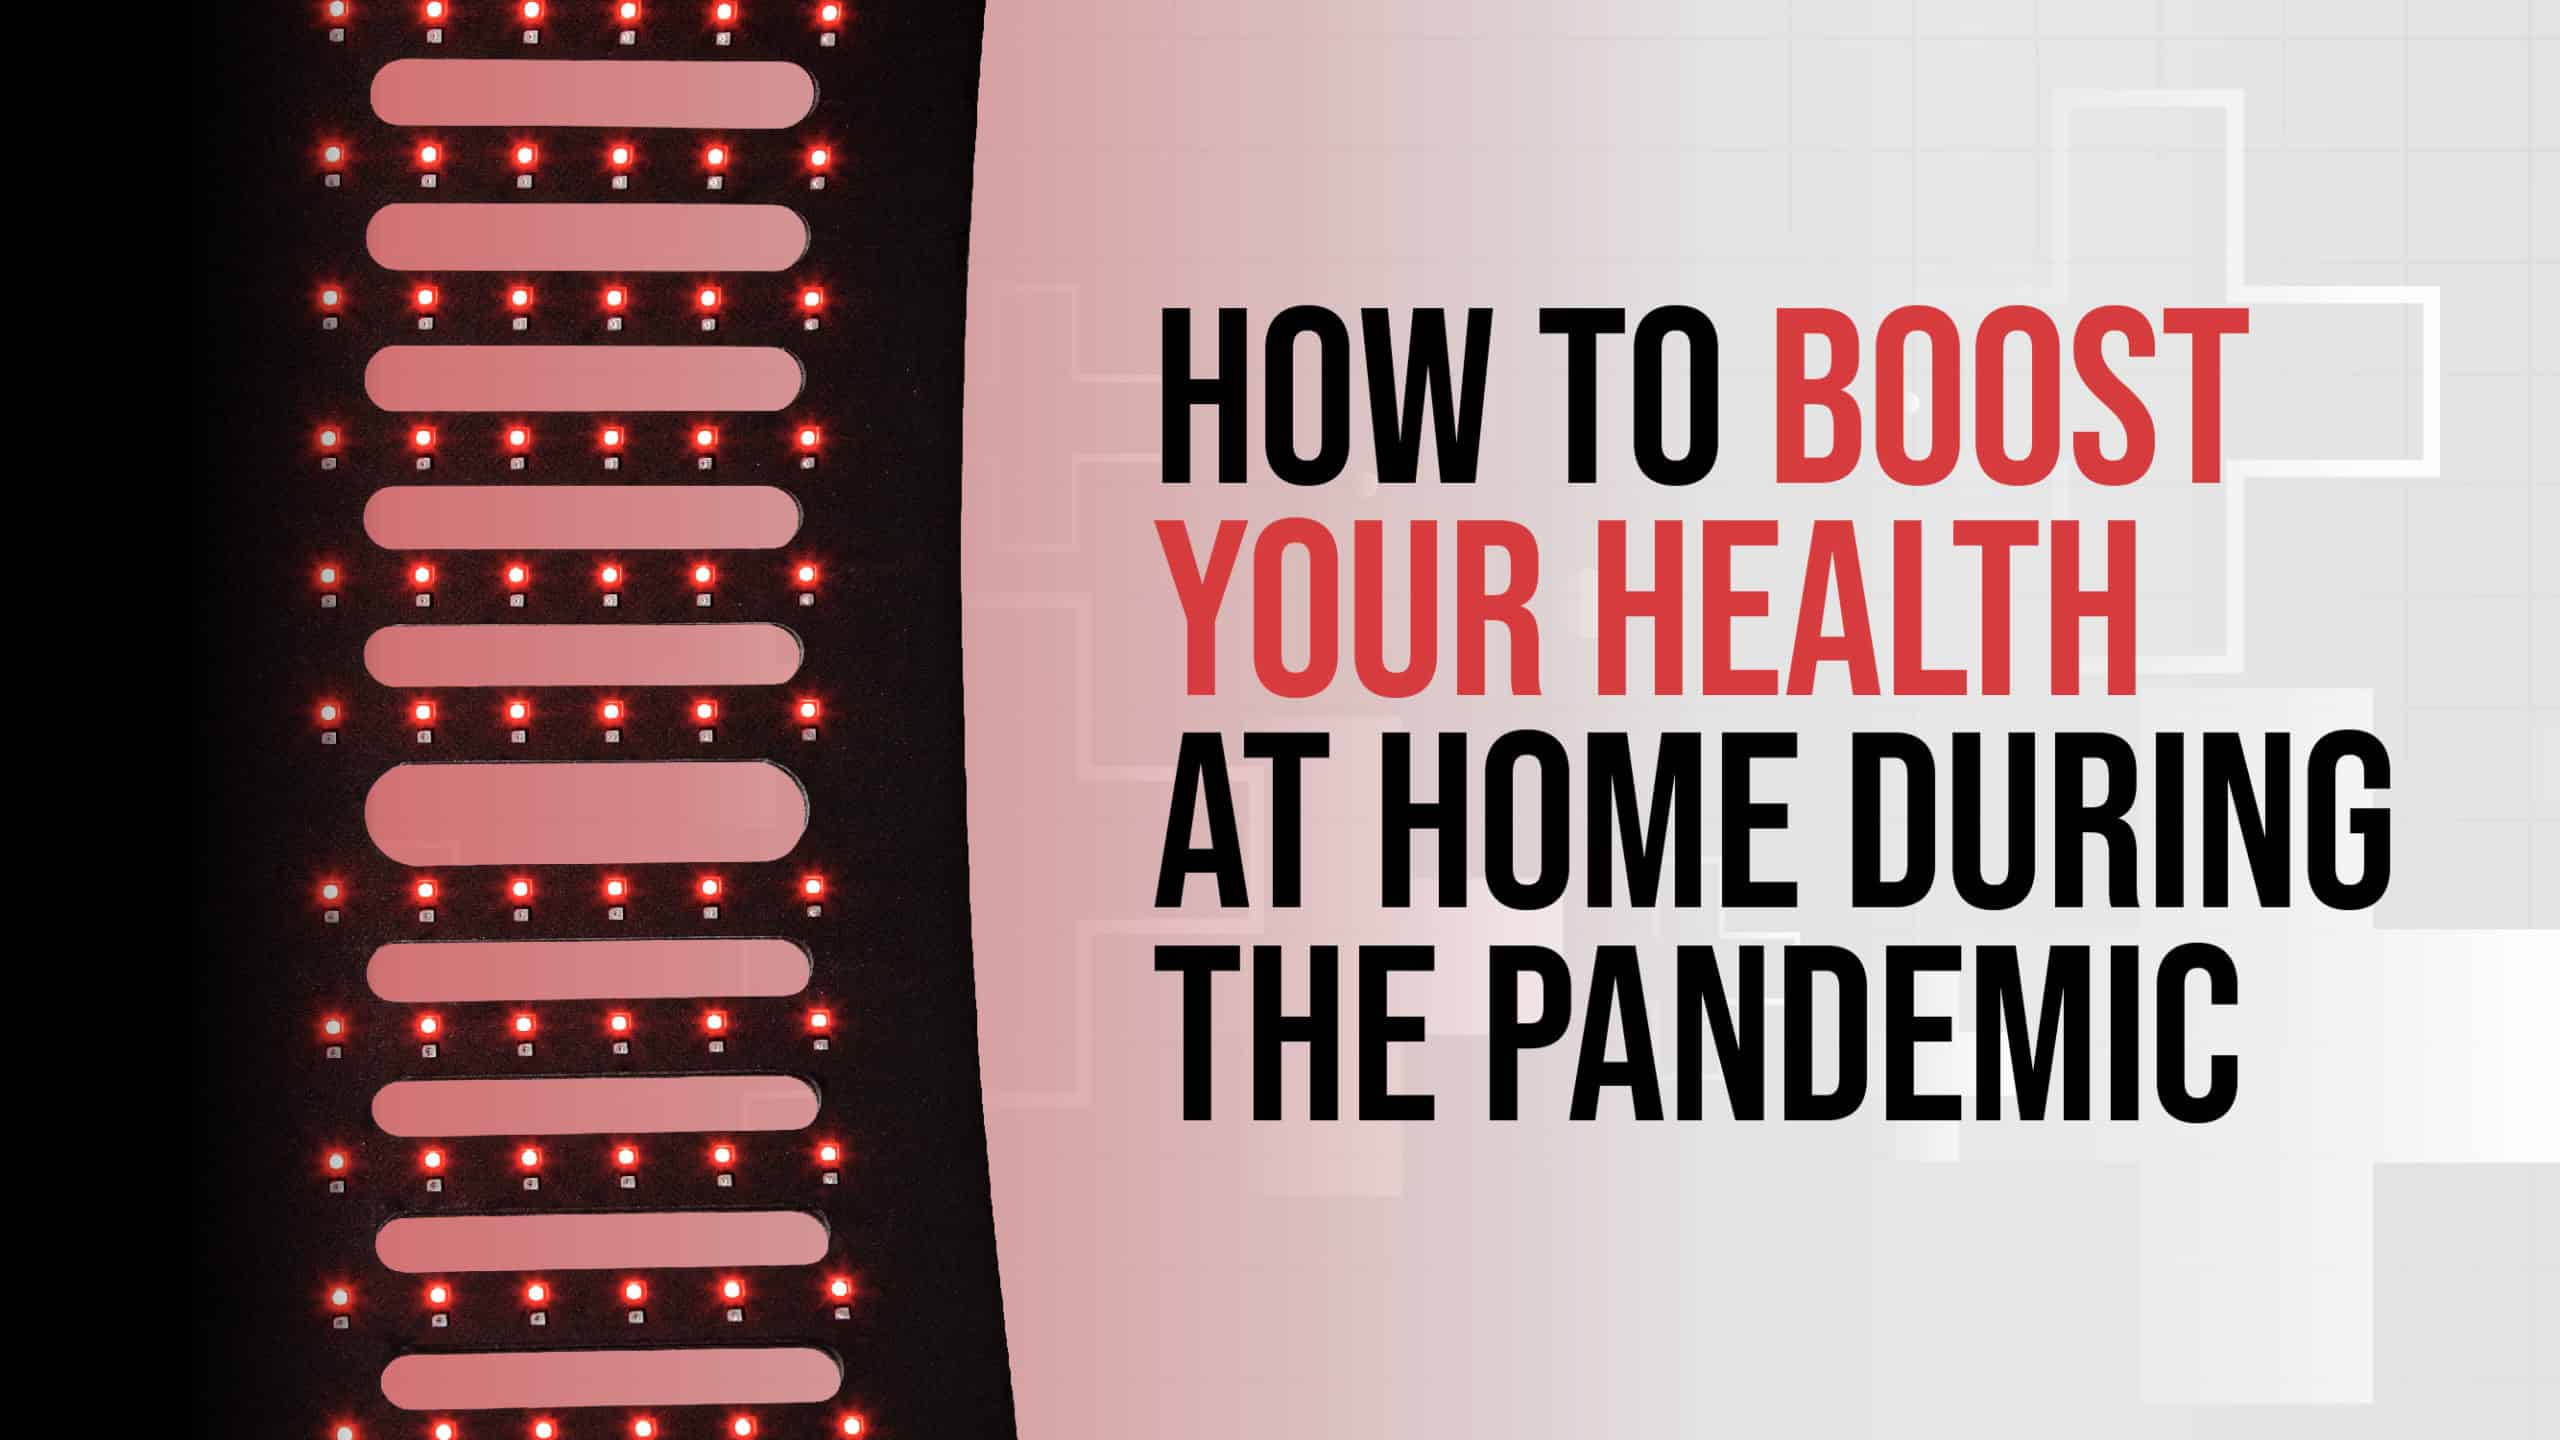 How To Boost Your Health At Home During The Pandemic featured image